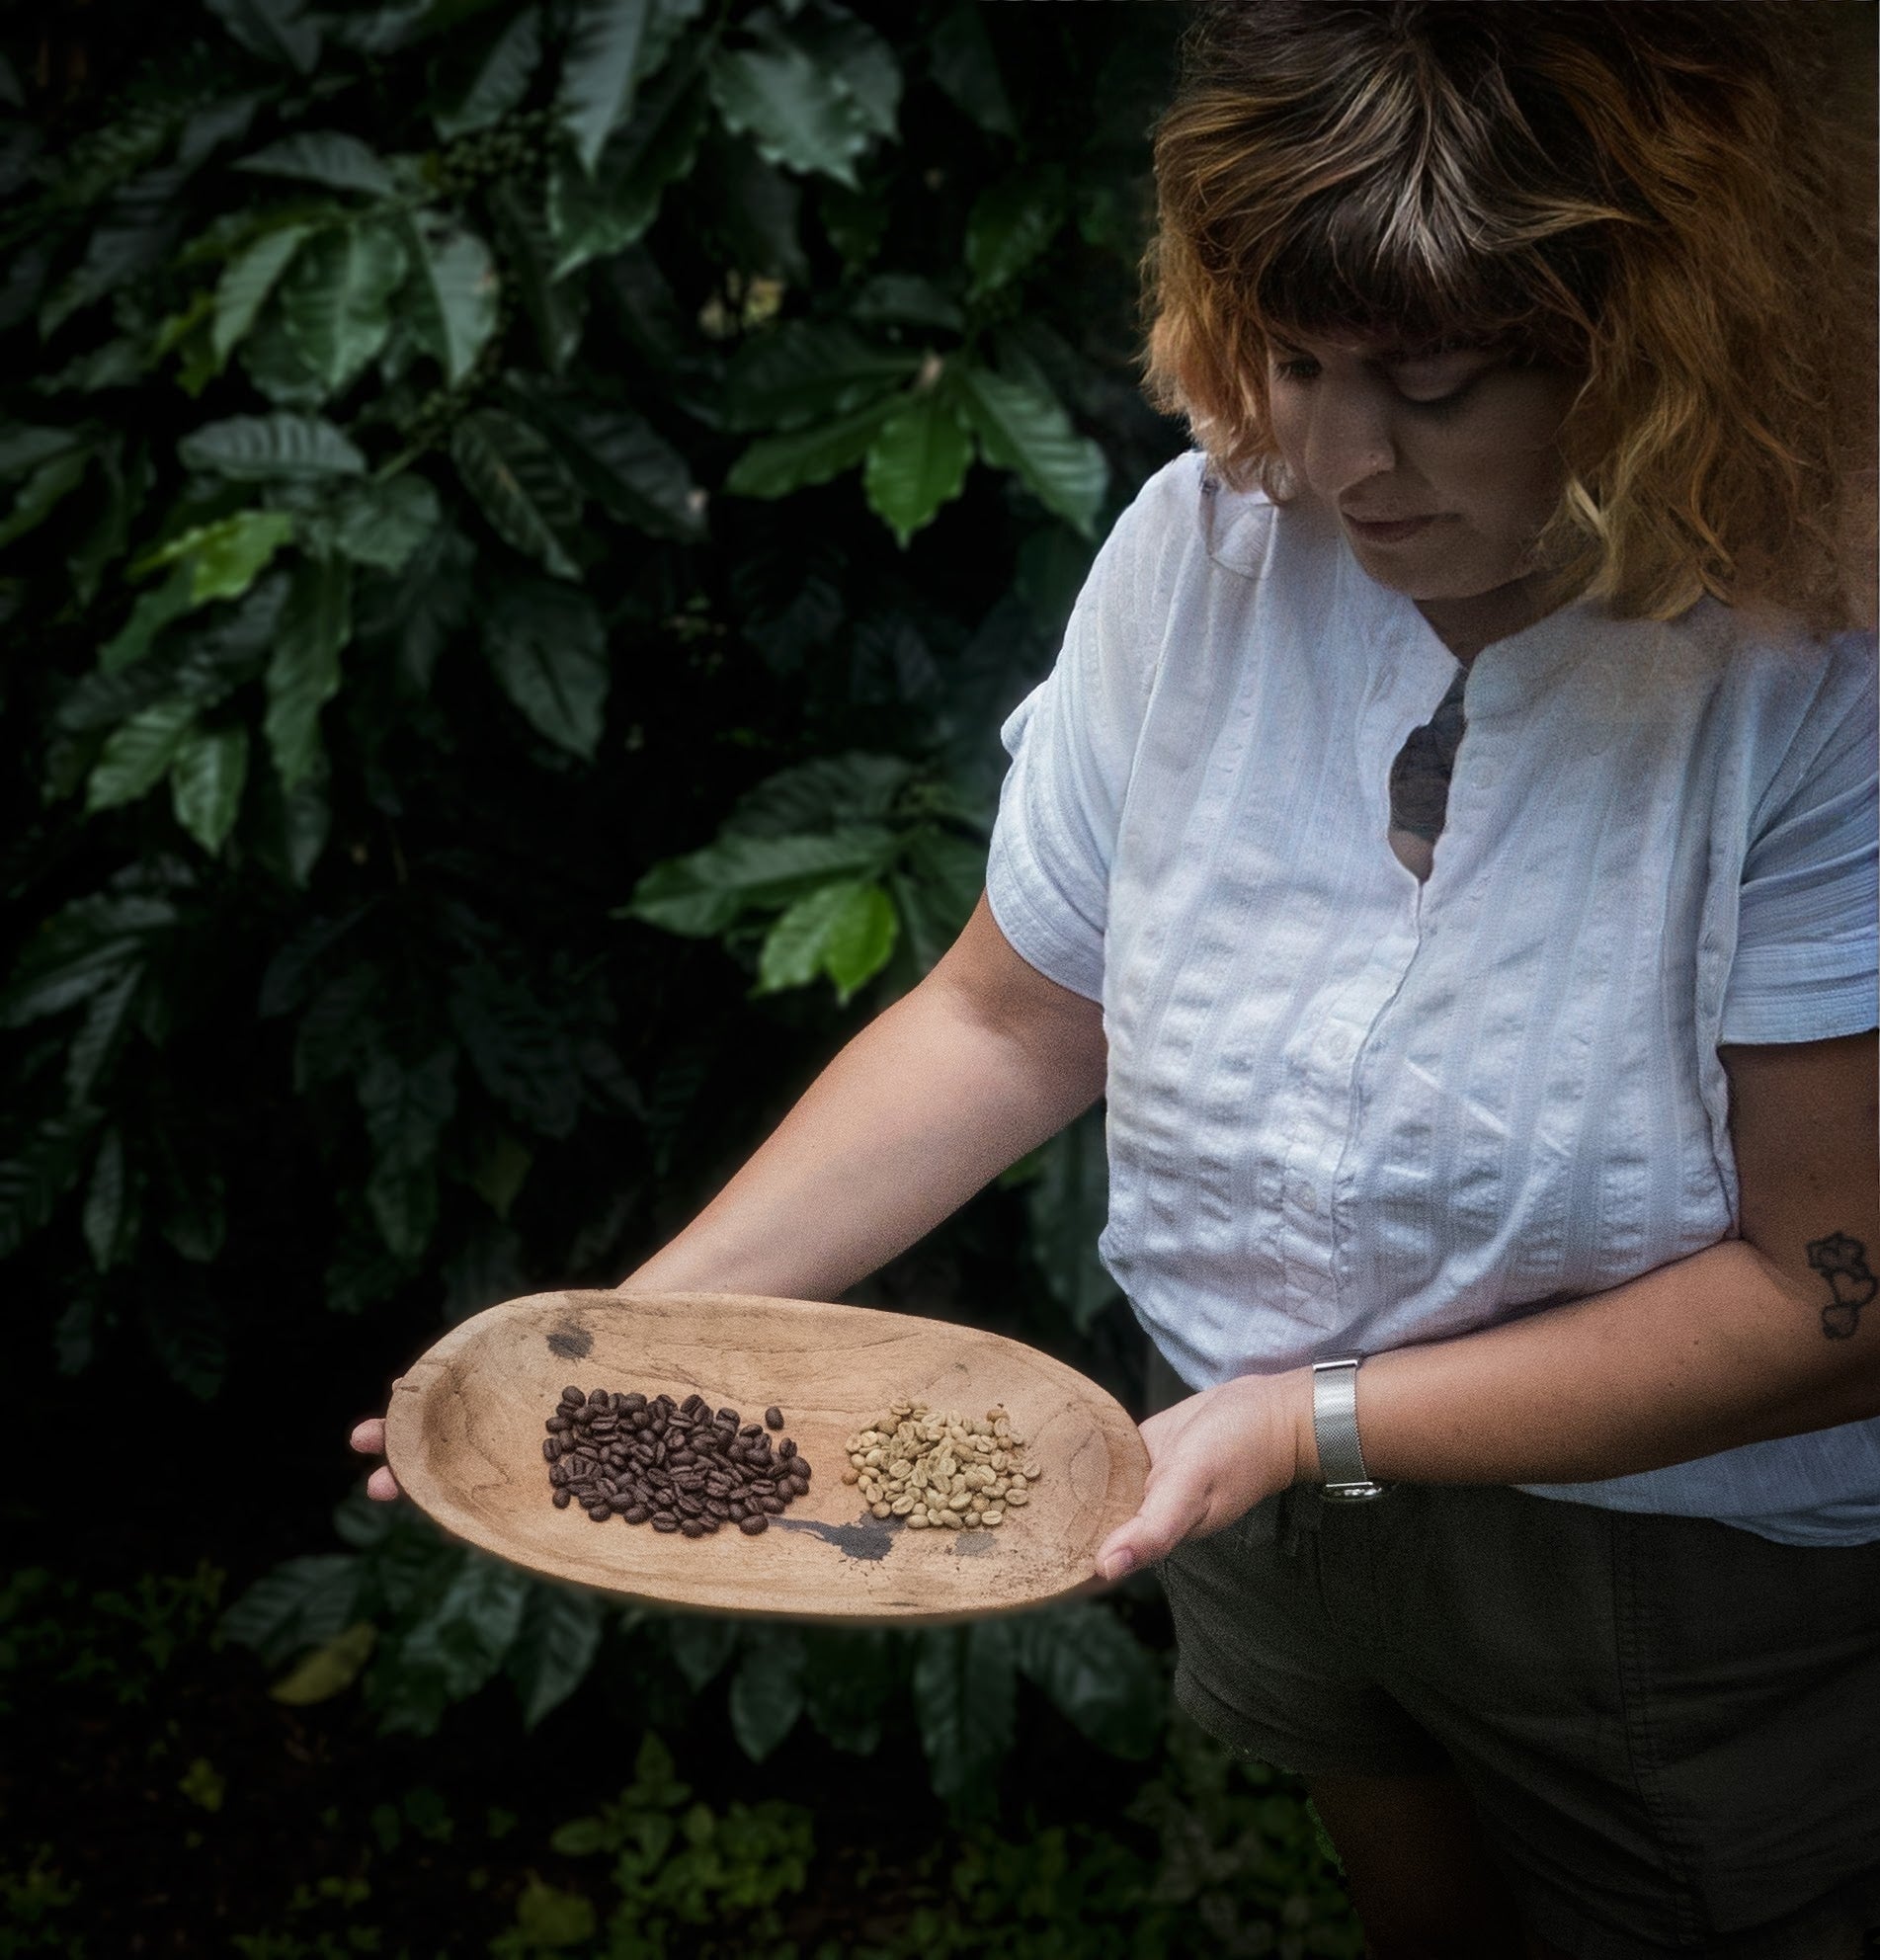 llama founder Lisa Trinidad showing off the roast at finca dos jefes one side is raw green beans the other side of the tray is roasted coffee beans 